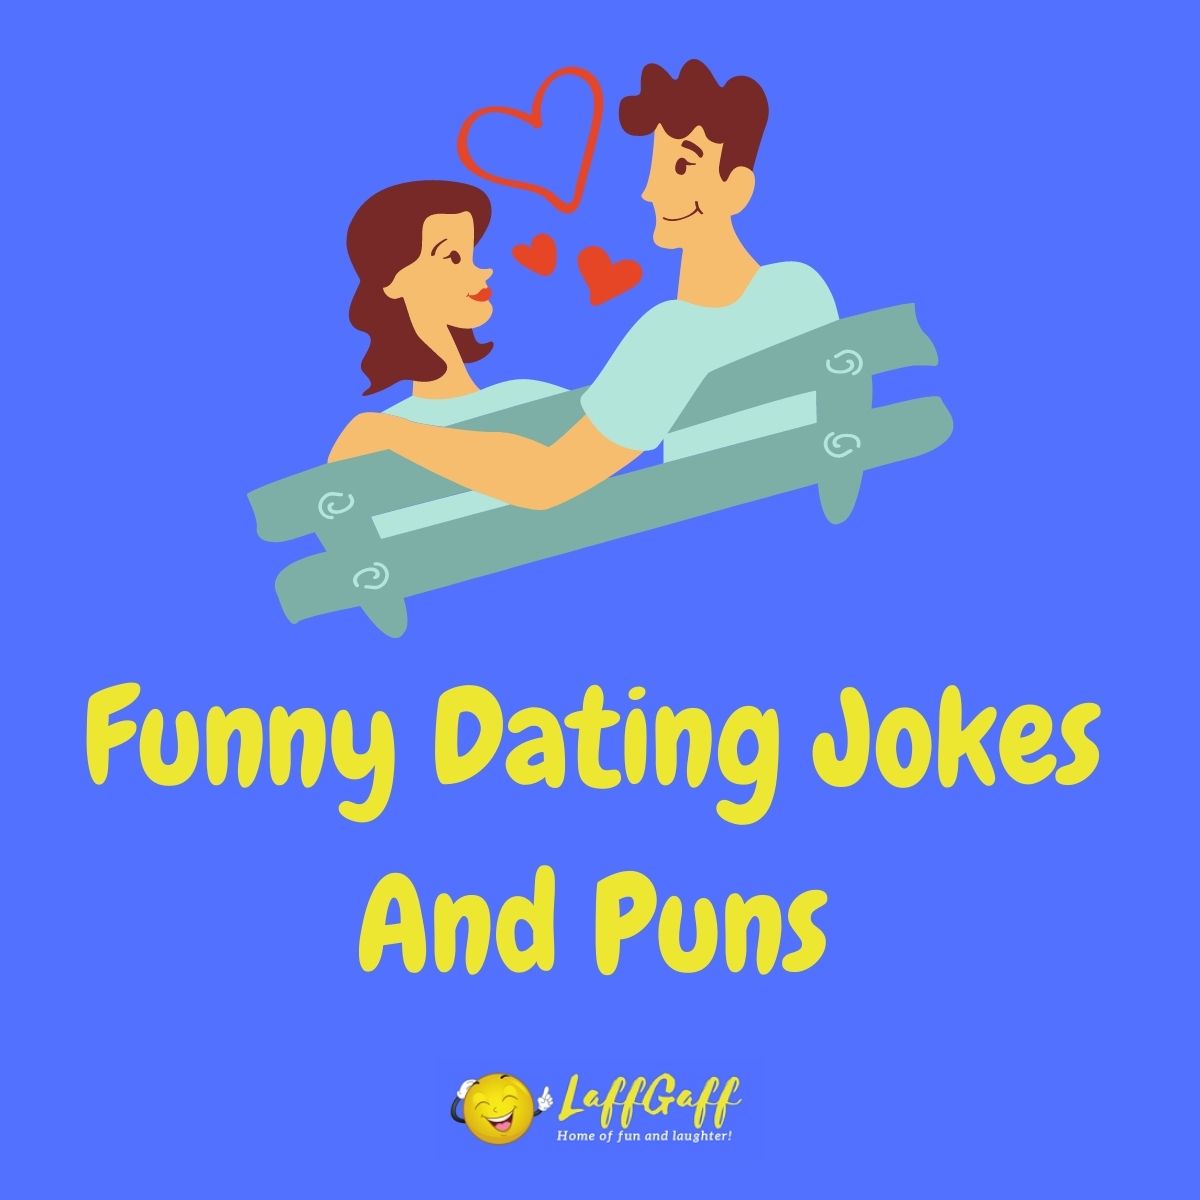 Featured image for a page of funny dating jokes and puns.